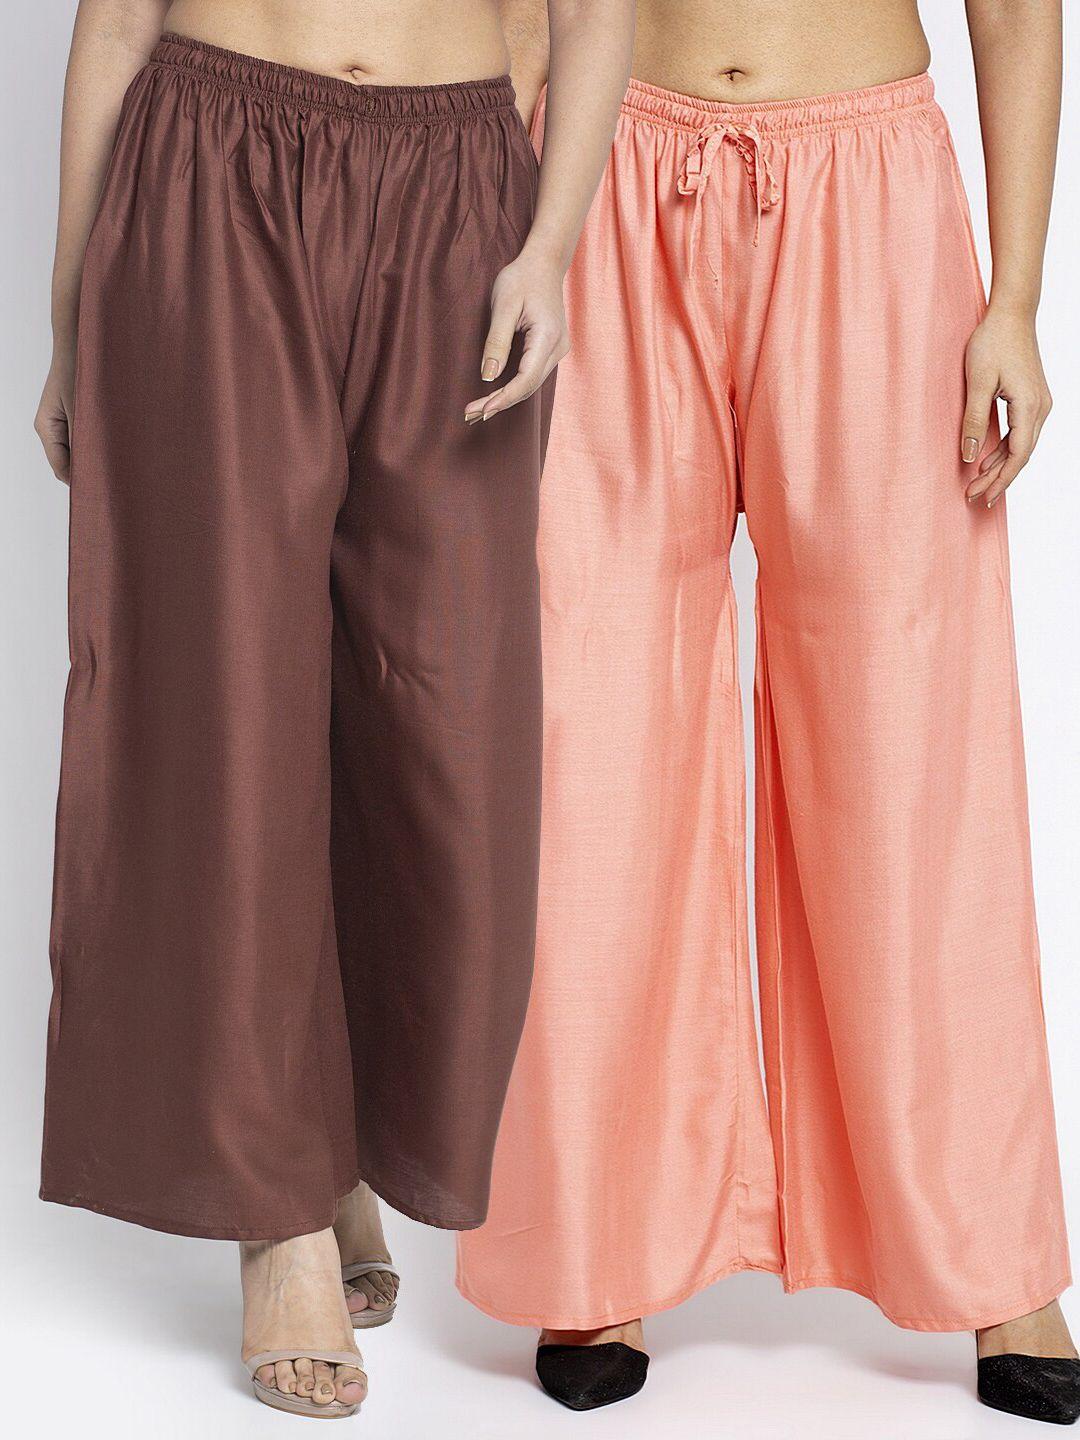 gracit women pack of 2 brown & peach-coloured ethnic palazzos